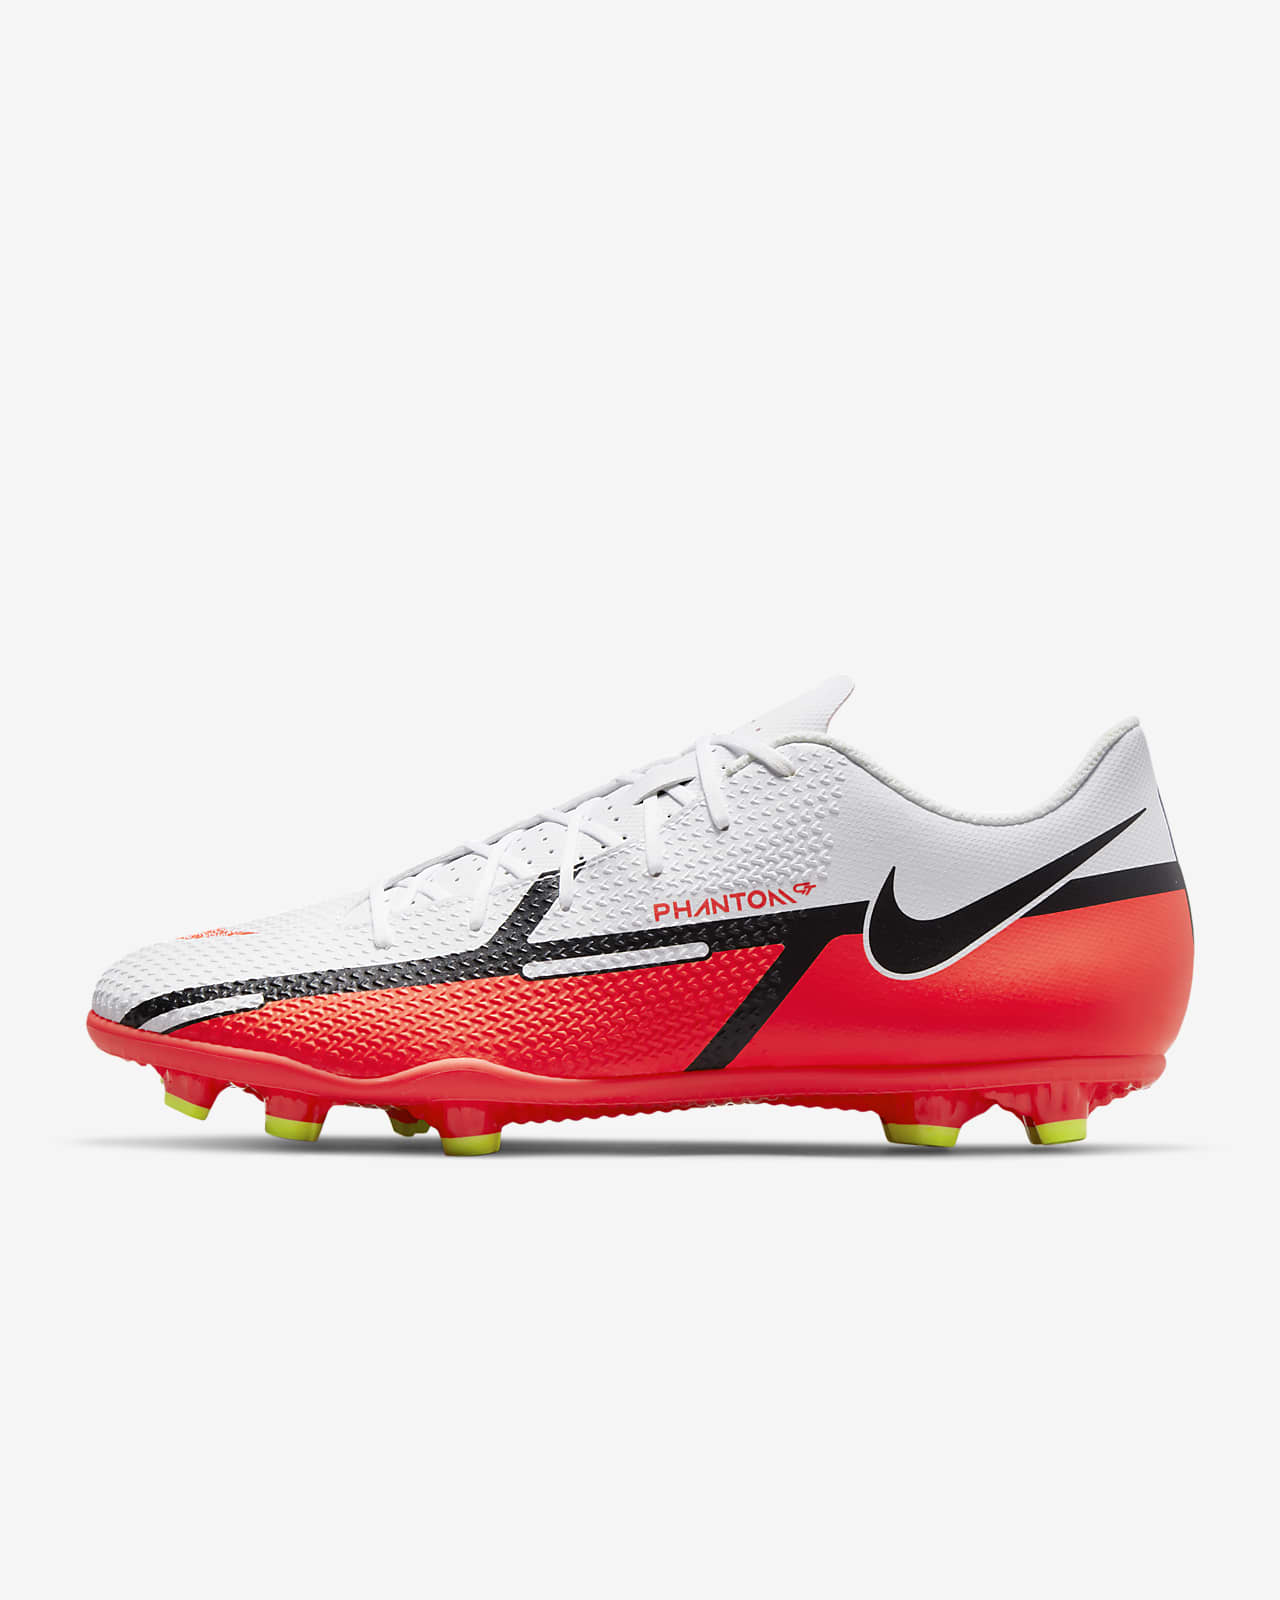 Nike Air Zoom Vapor 15 Elite ONE MONTH REVIEW  Pro Footballer Boot Reviews   YouTube